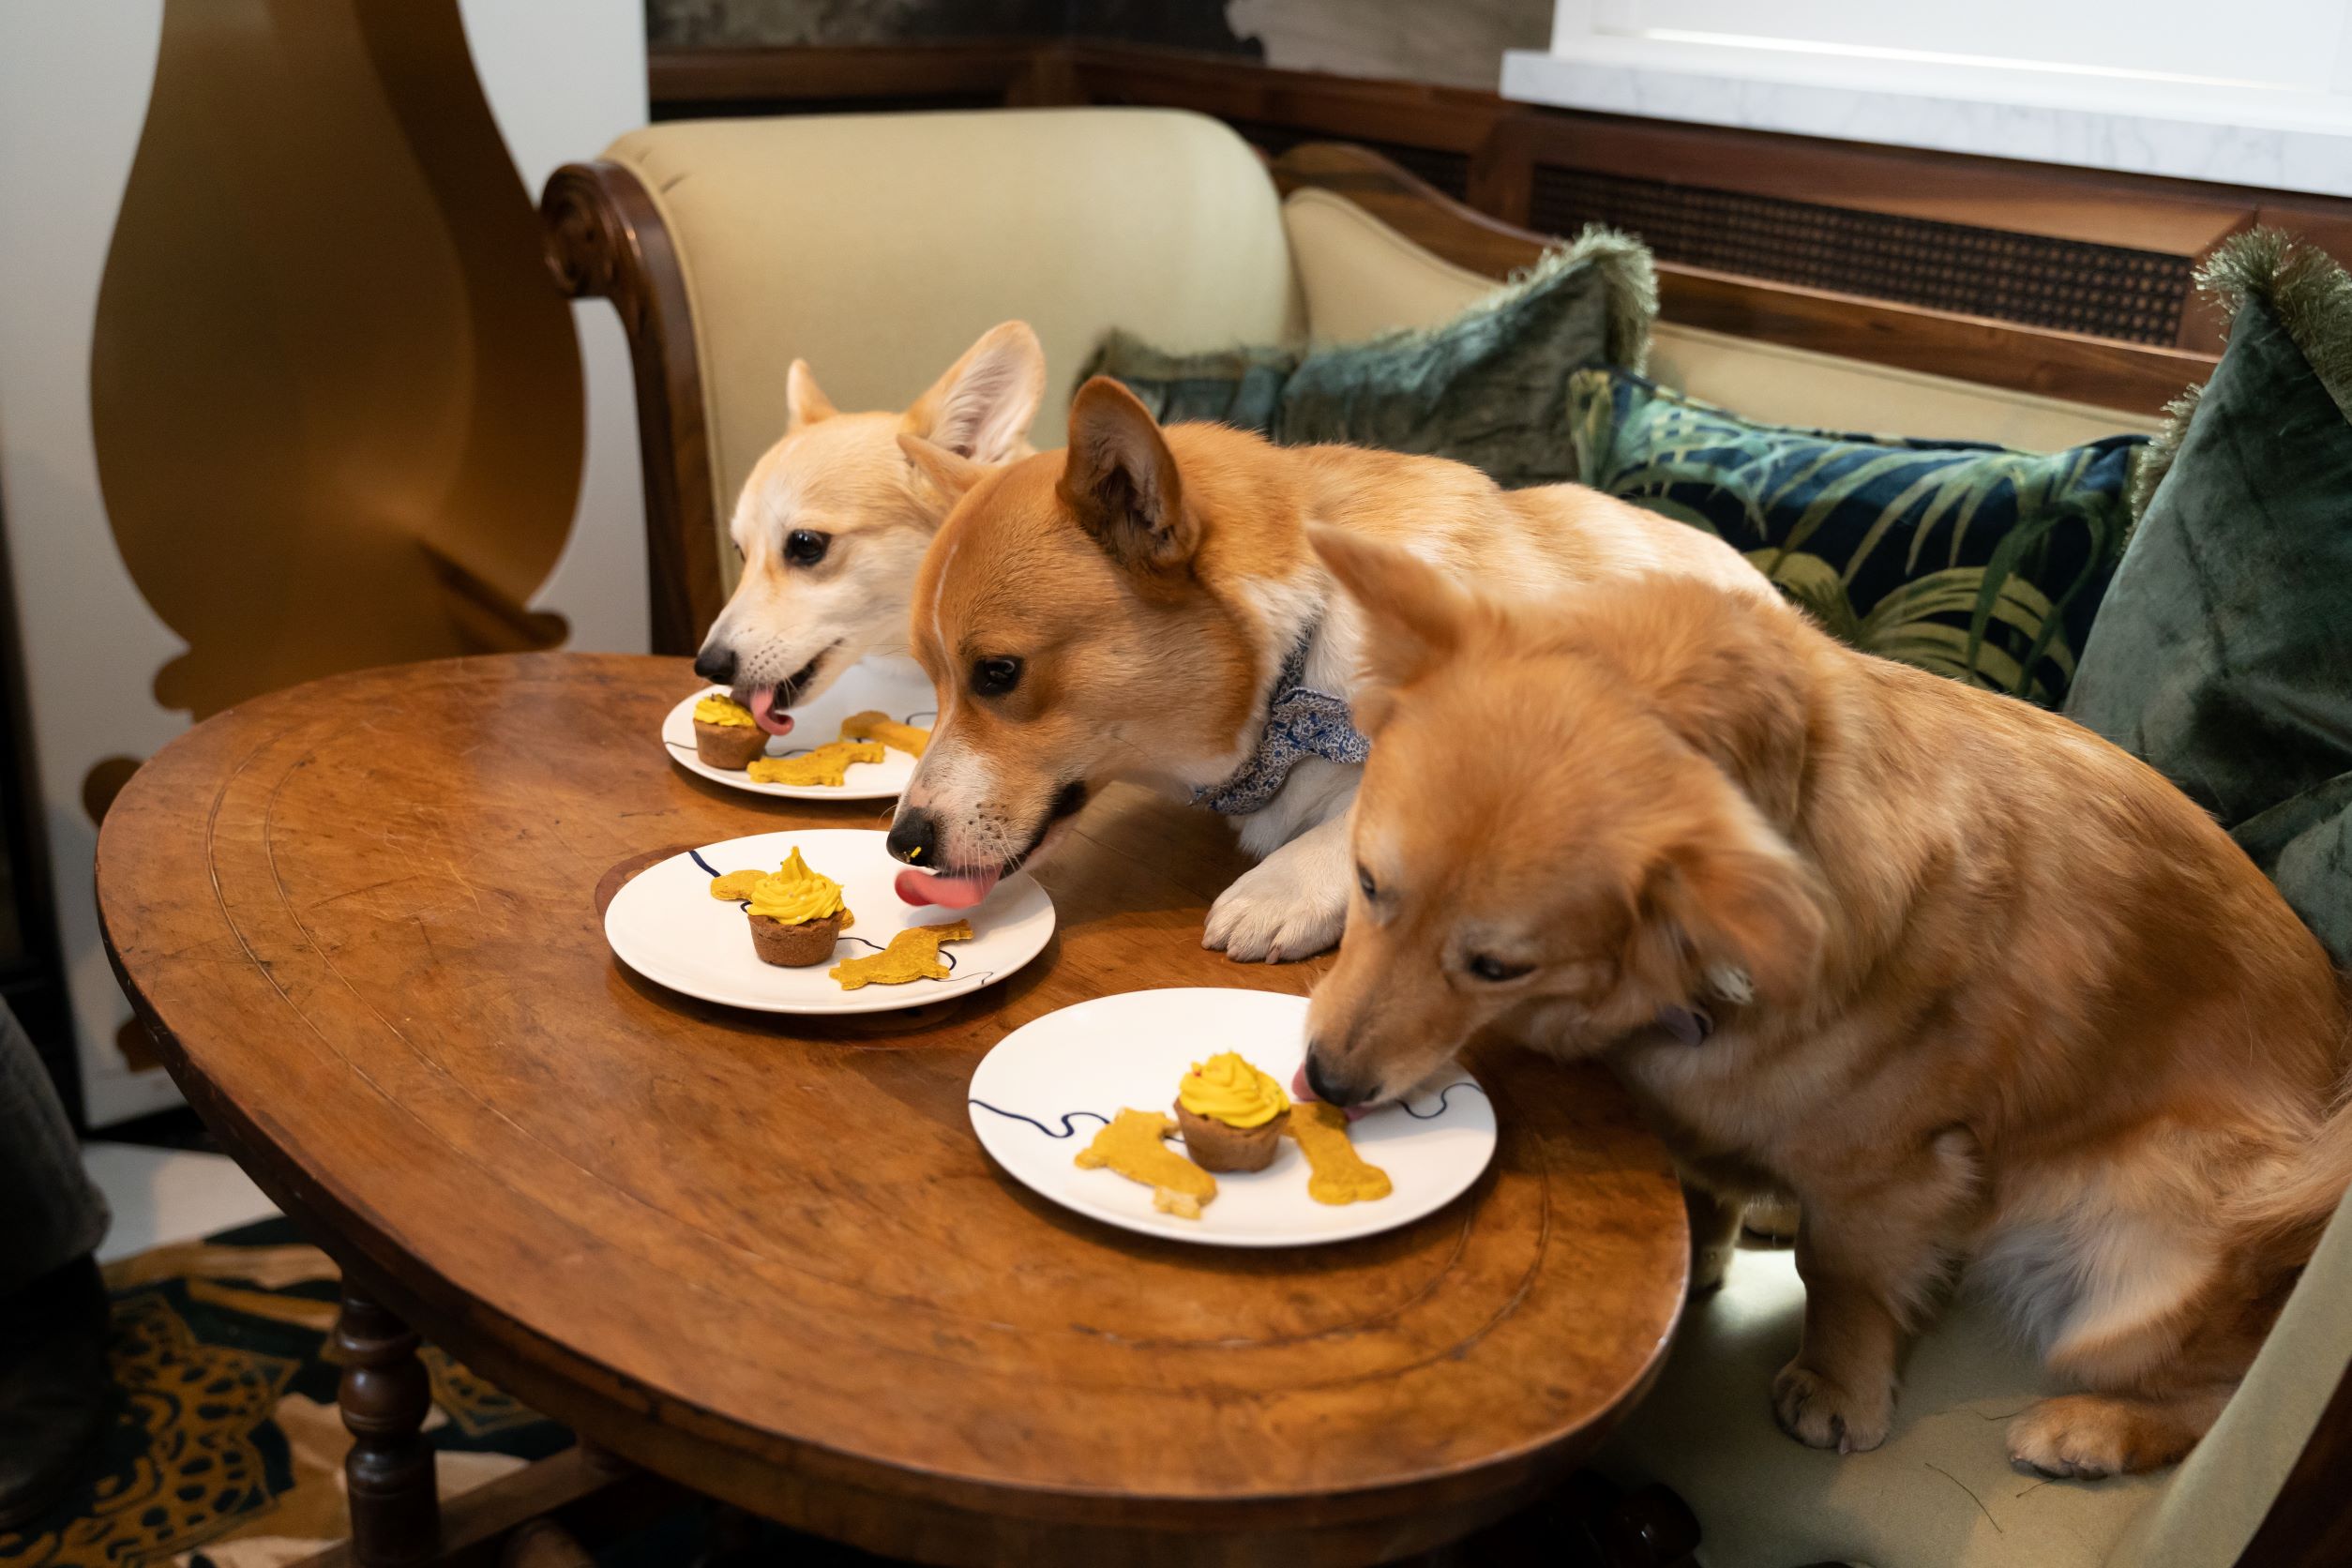 3 Corgis sitting on a bench eating pupcakes off a table.